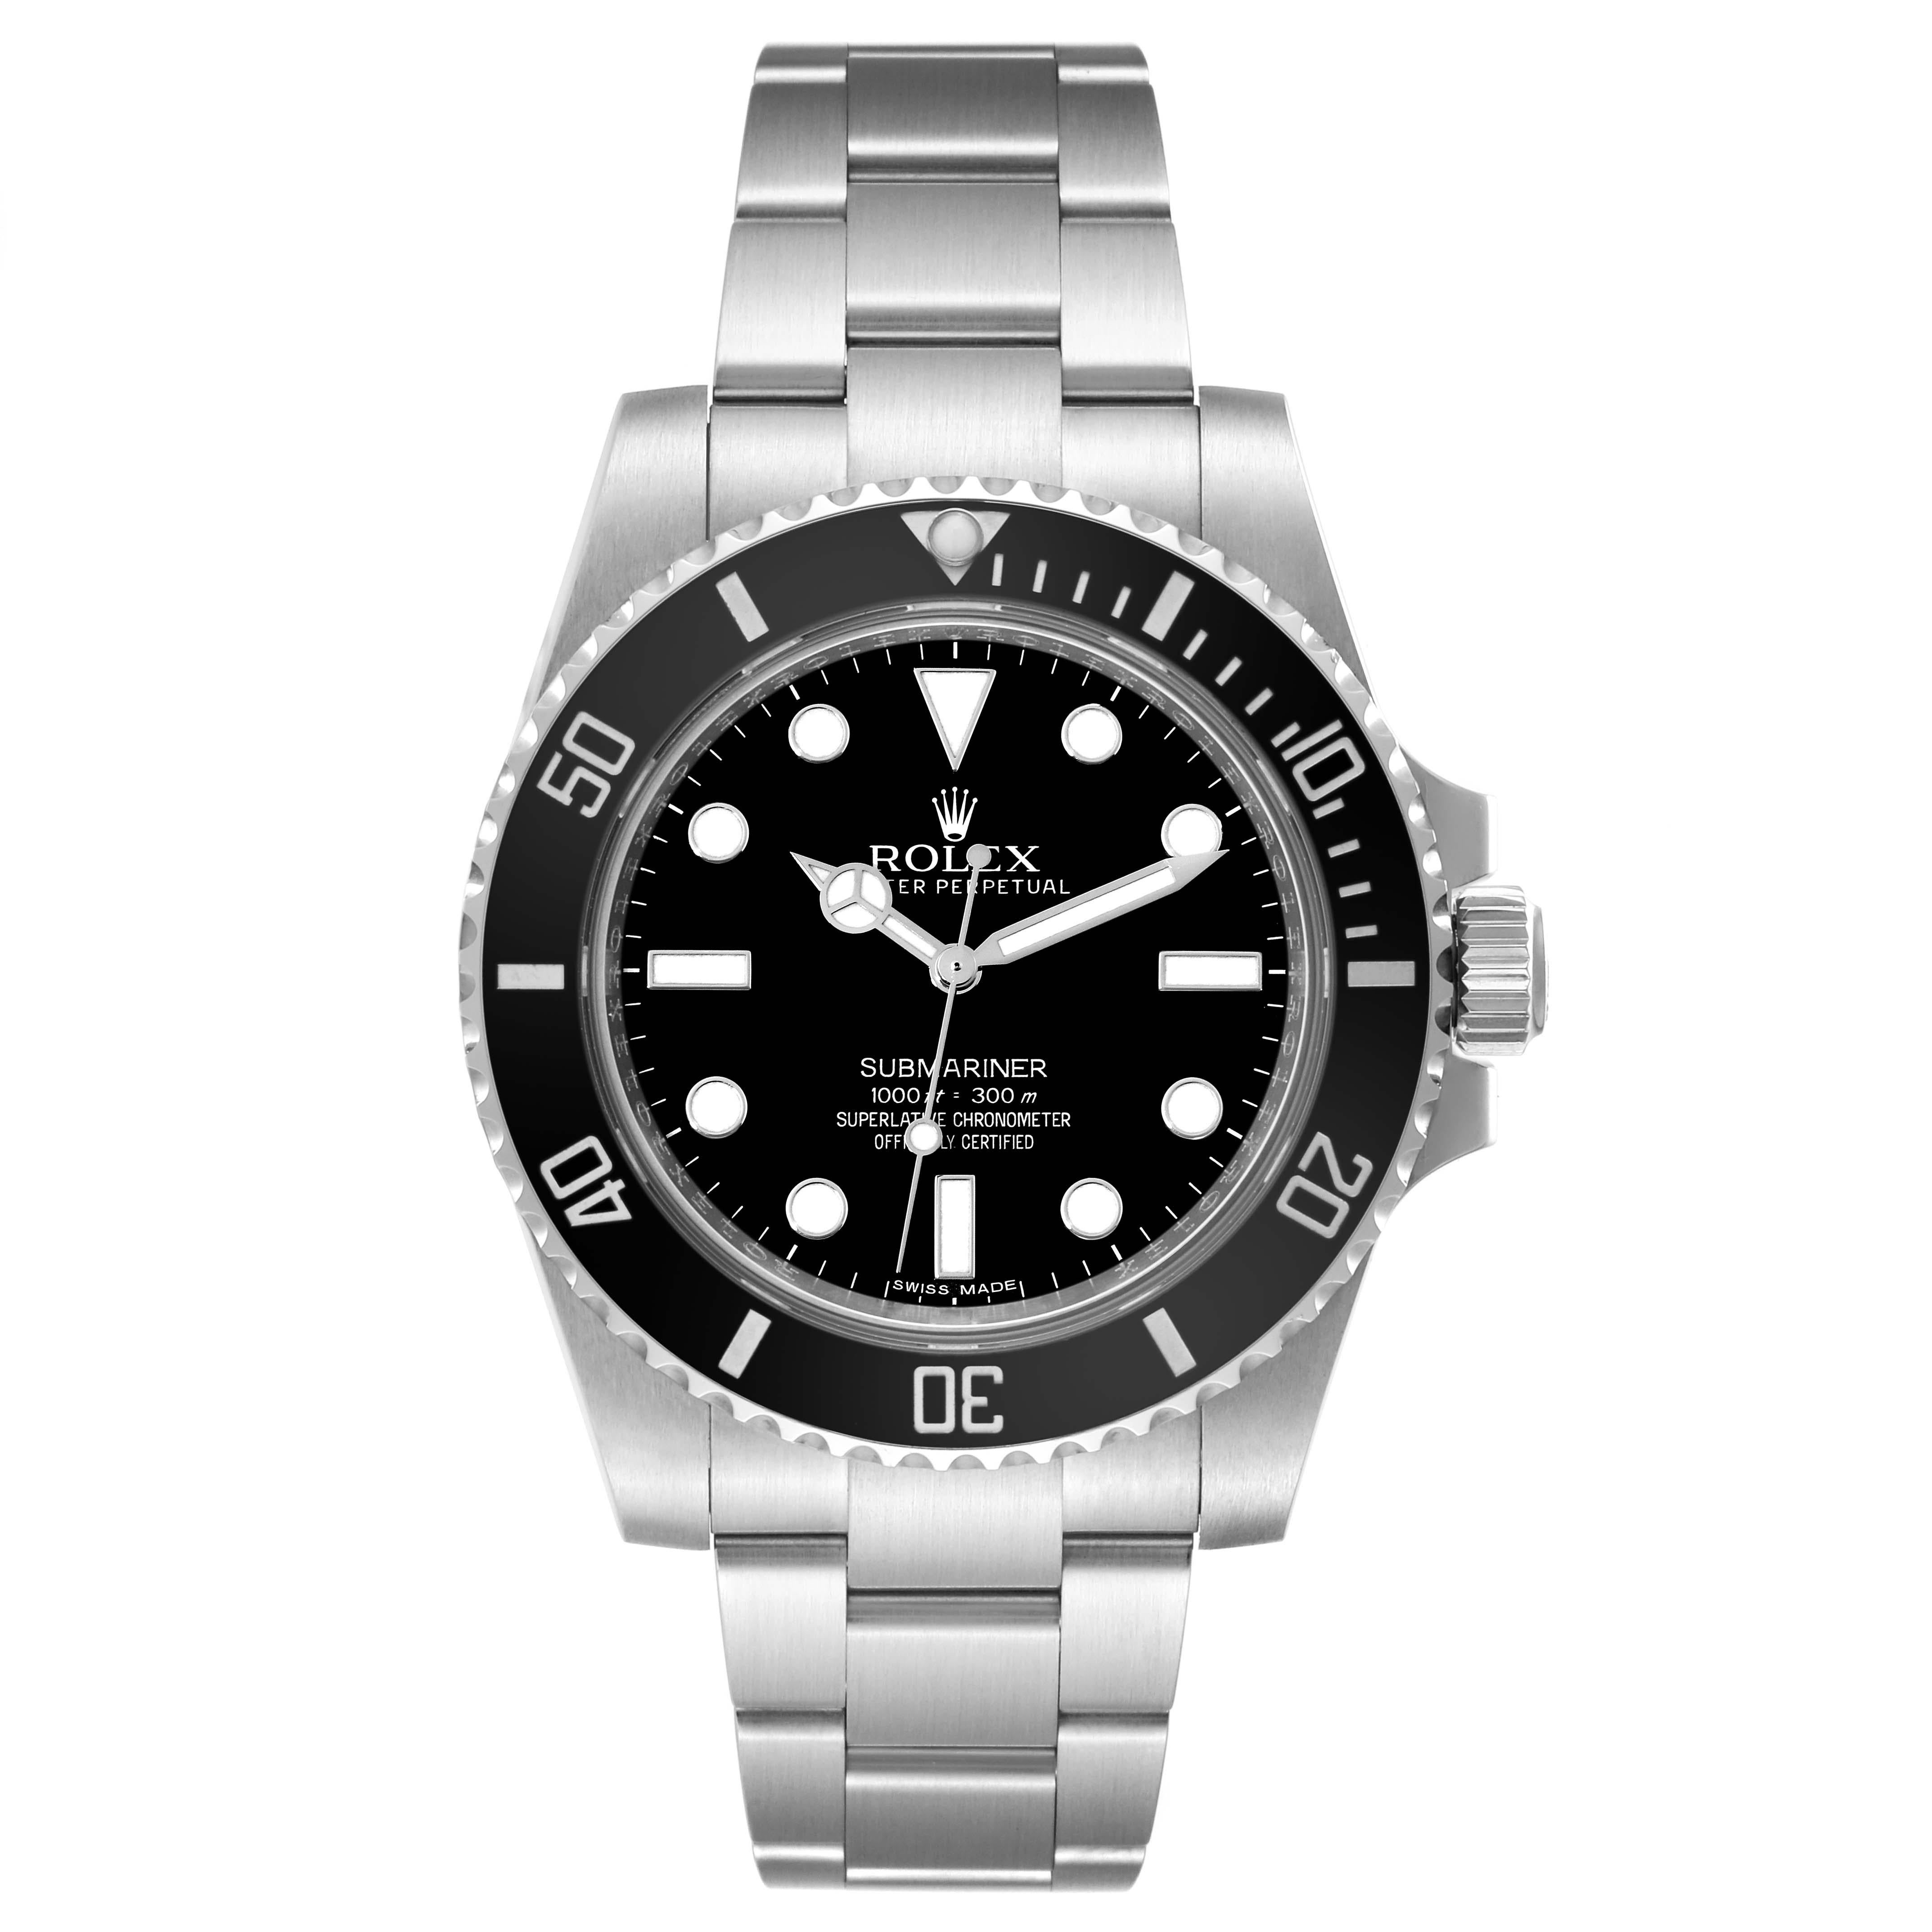 Rolex Submariner Black Dial Ceramic Bezel Steel Mens Watch 114060 Box Card. Officially certified chronometer automatic self-winding movement. Stainless steel case 40.0 mm in diameter. Rolex logo on the crown. Stainless steel uni-directional rotating